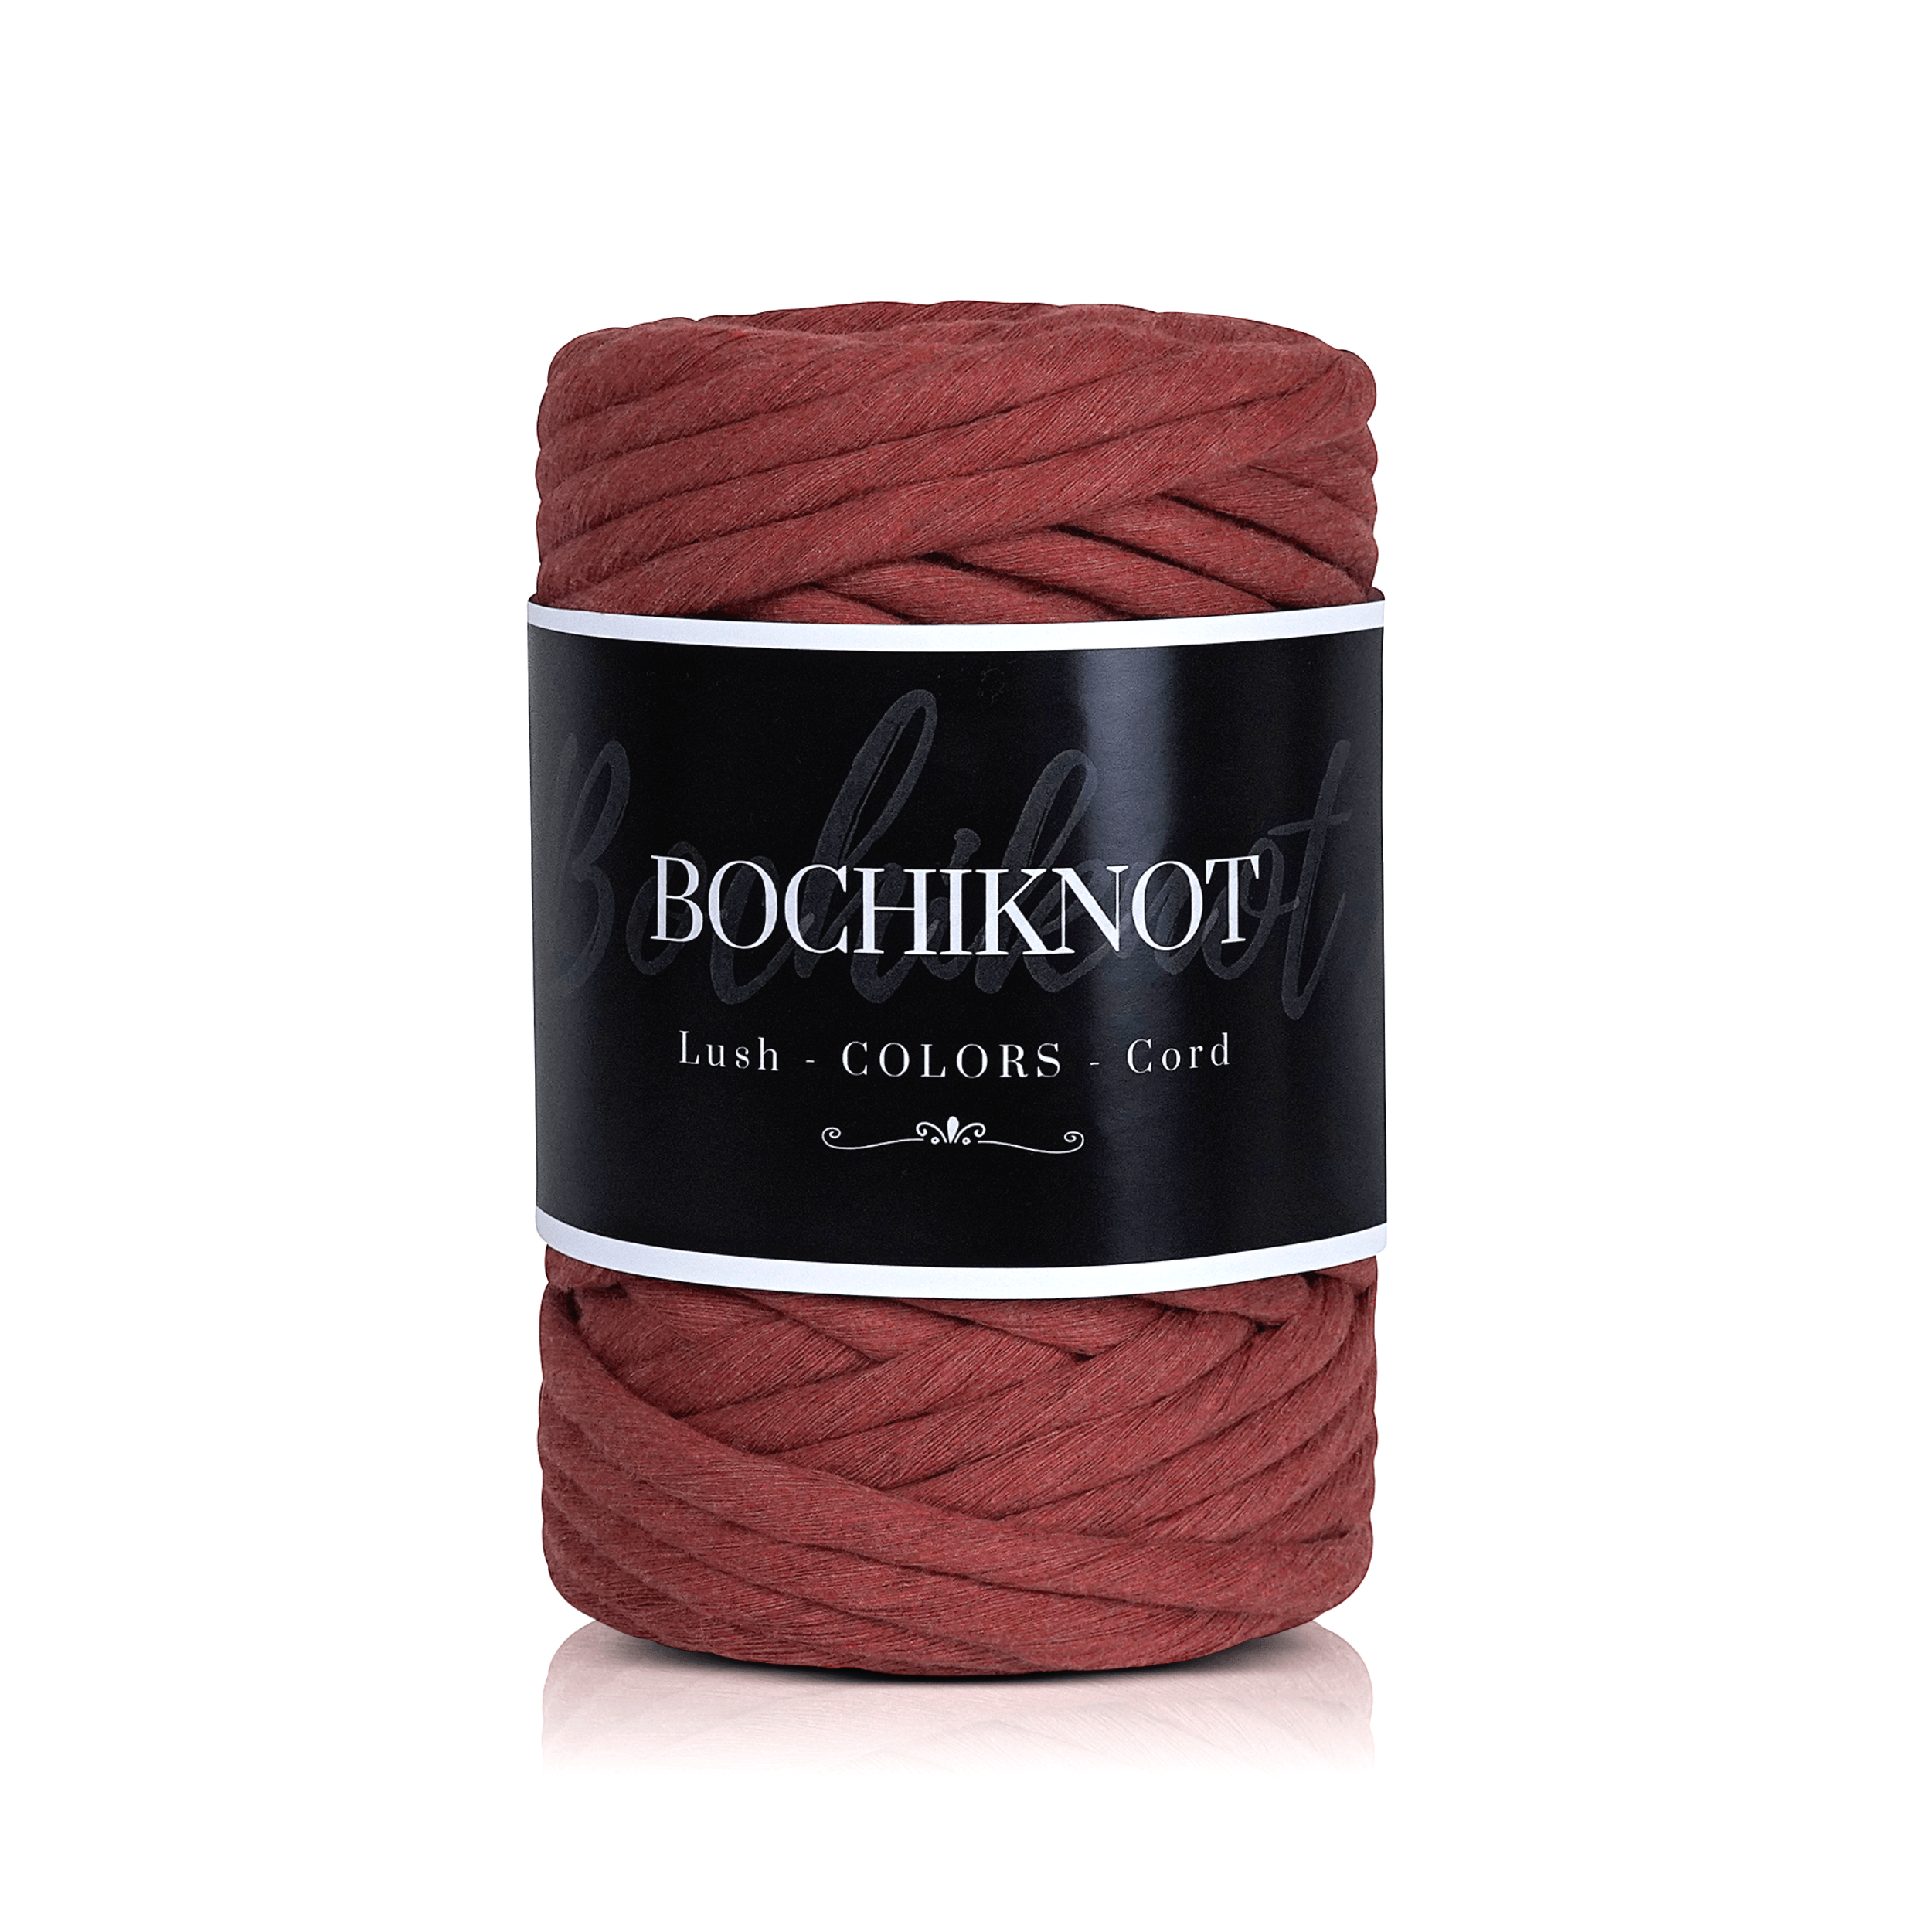 BOCHIKNOT 5mm Macrame Cord - Single Strand Macrame Cord - Cotton Cord for Macrame & Knotting - Macrame Rope Supplies in 3mm 4mm 5mm for Crafts, Wall